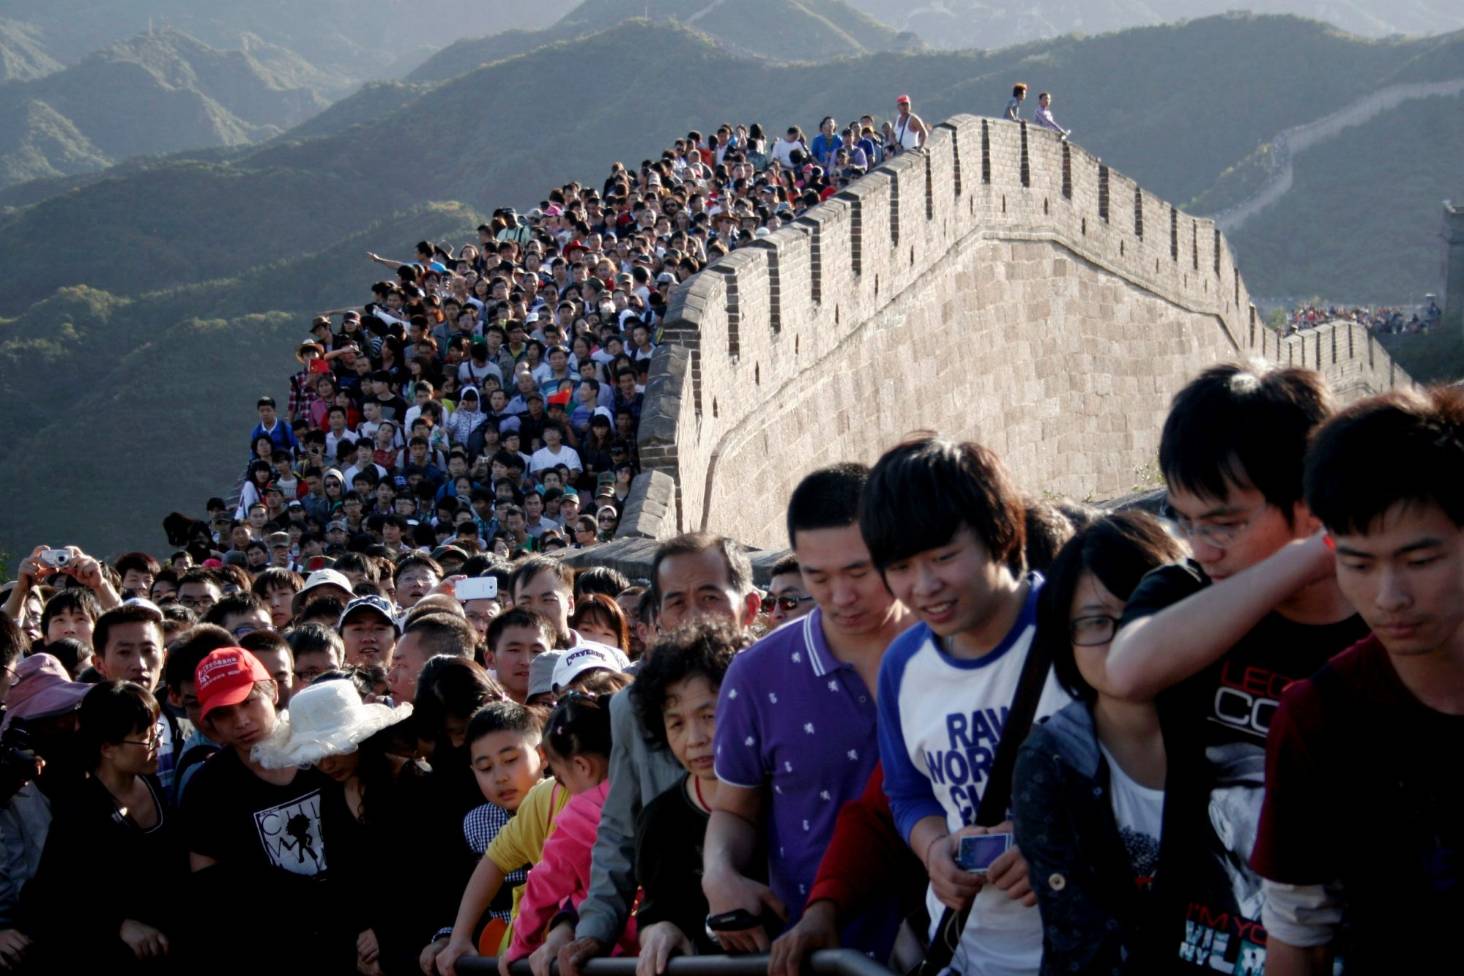 Crowded Tourist Destination: The Great Wall